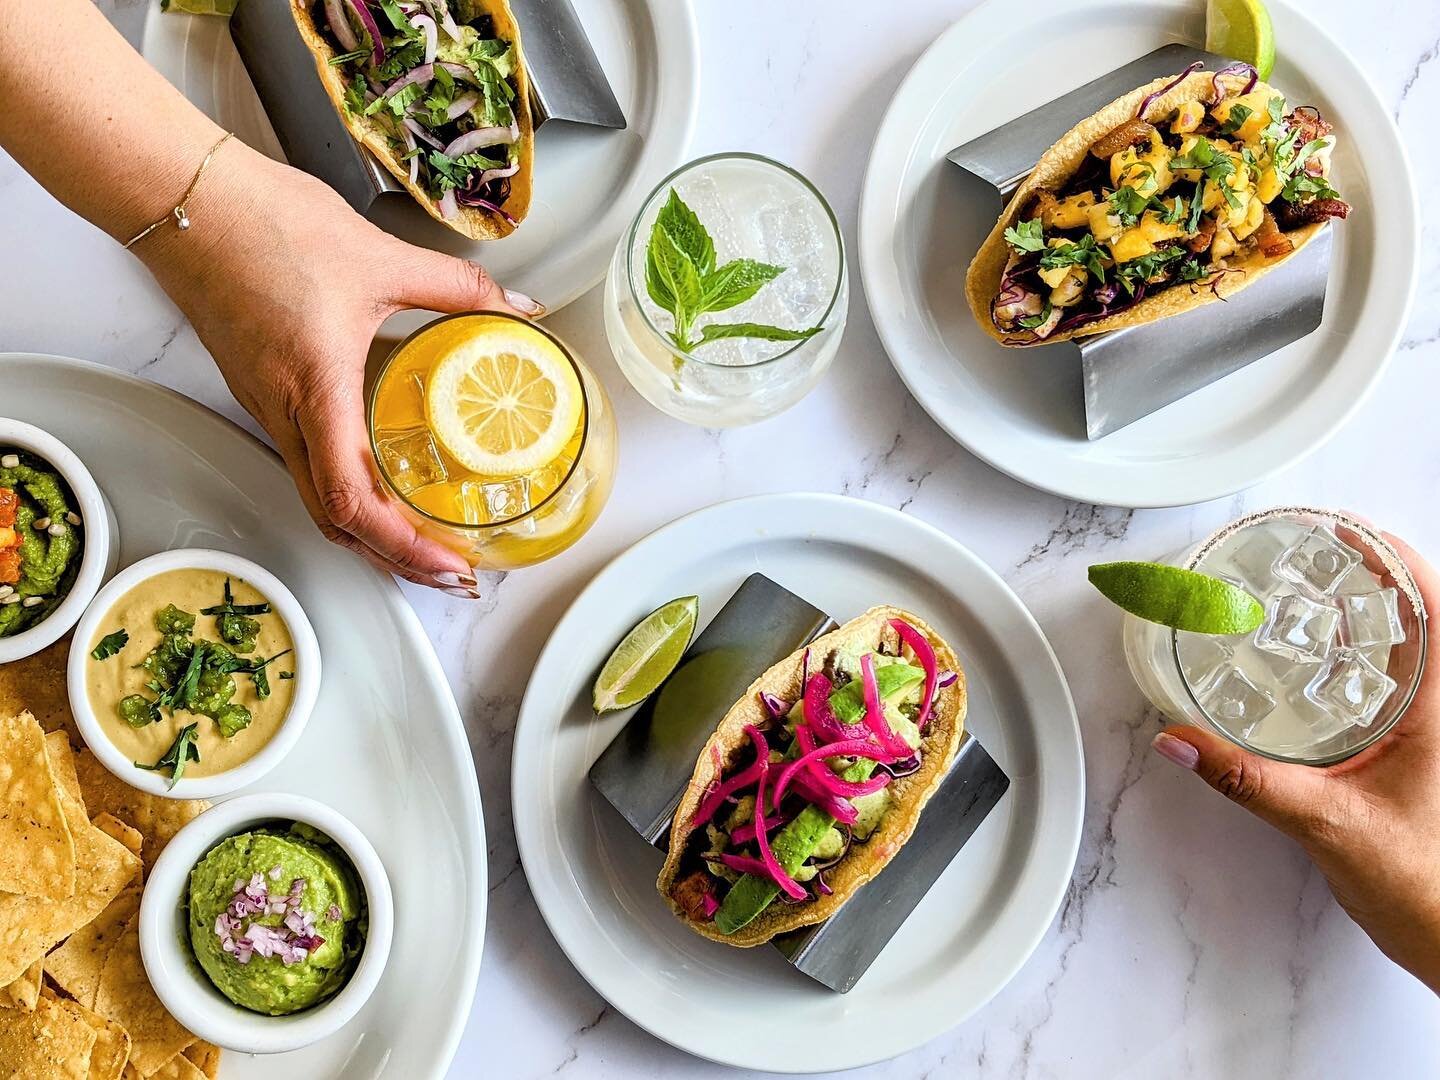 Feeling chilly? Warm up with us during happy hour today, and every day from 3-6pm!  We have tacos a la carte, cocktails, and more!  Happy Hour is available at South 1st and Burnet every day. Link in bio for full menu and reservations. #happyhour #win